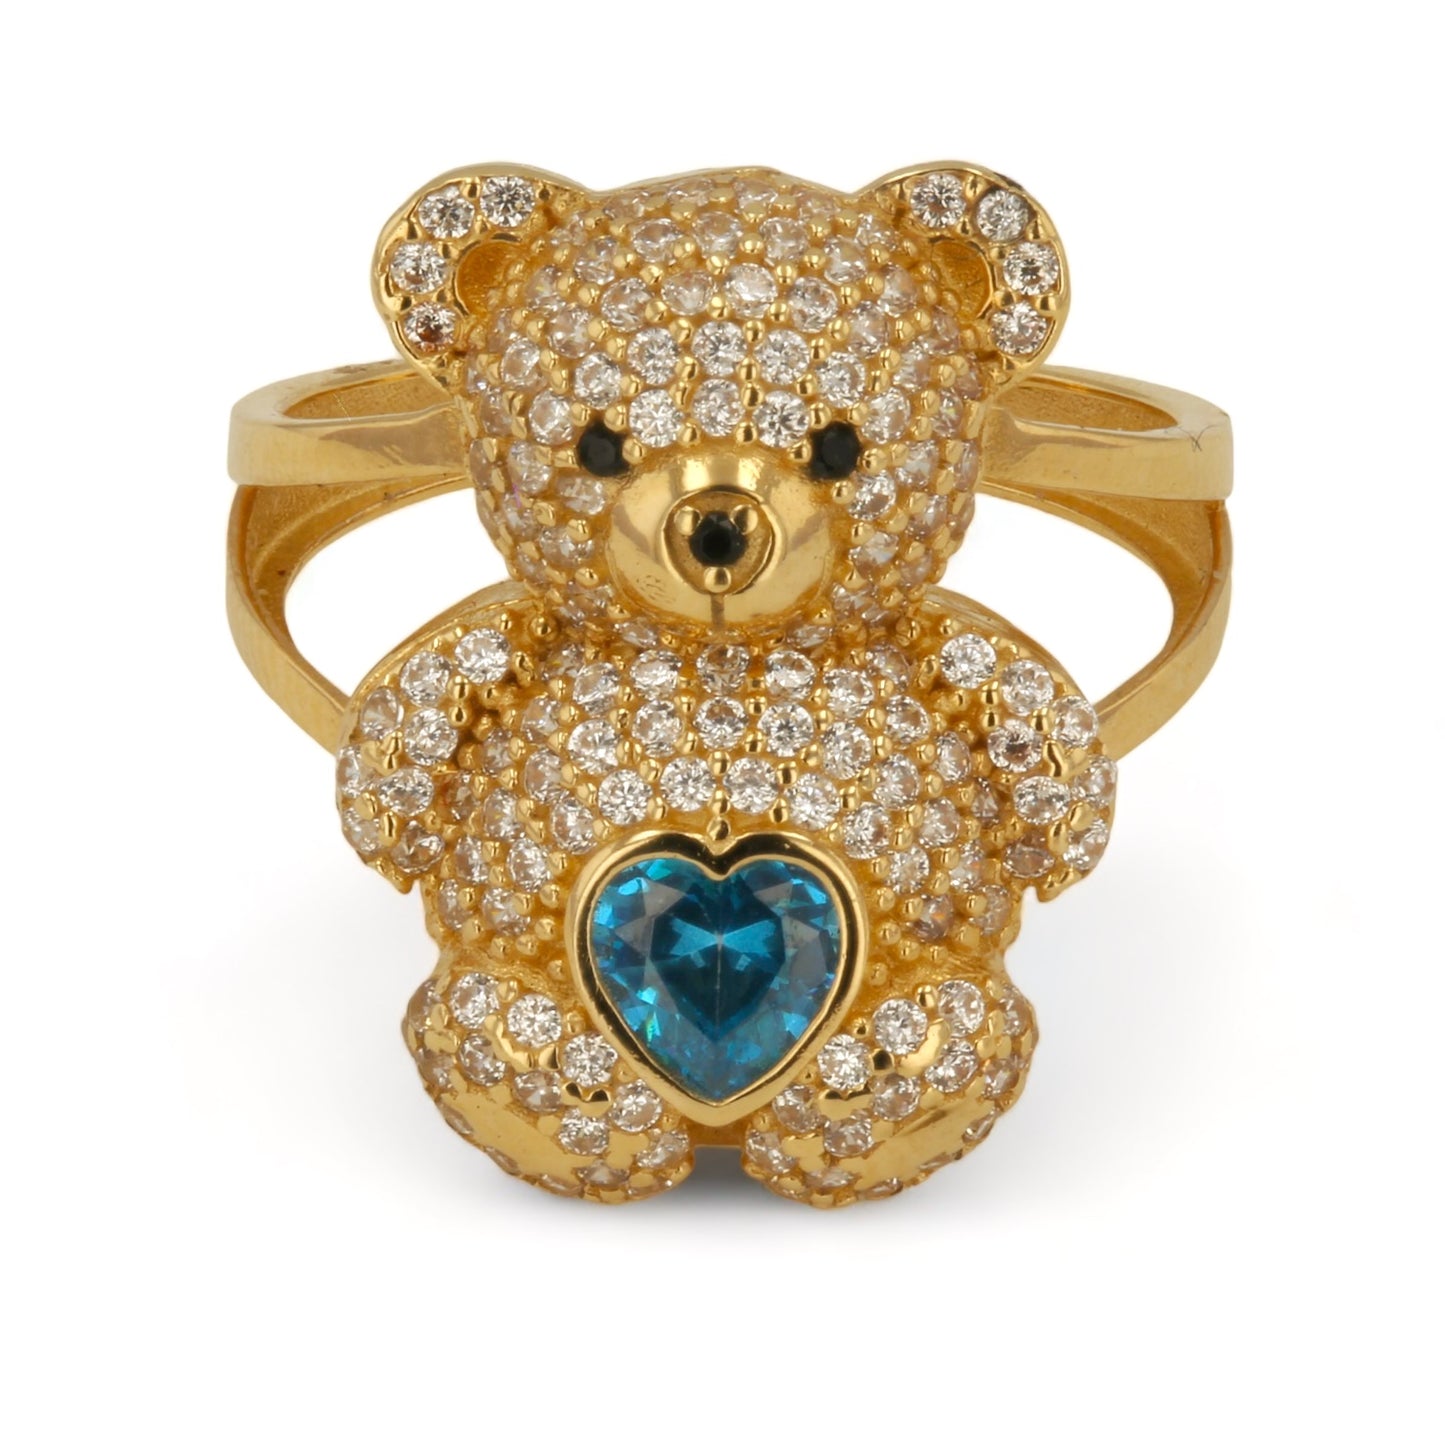 14K Yellow Gold Teddy Bear Ring with Blue Stone - 223762